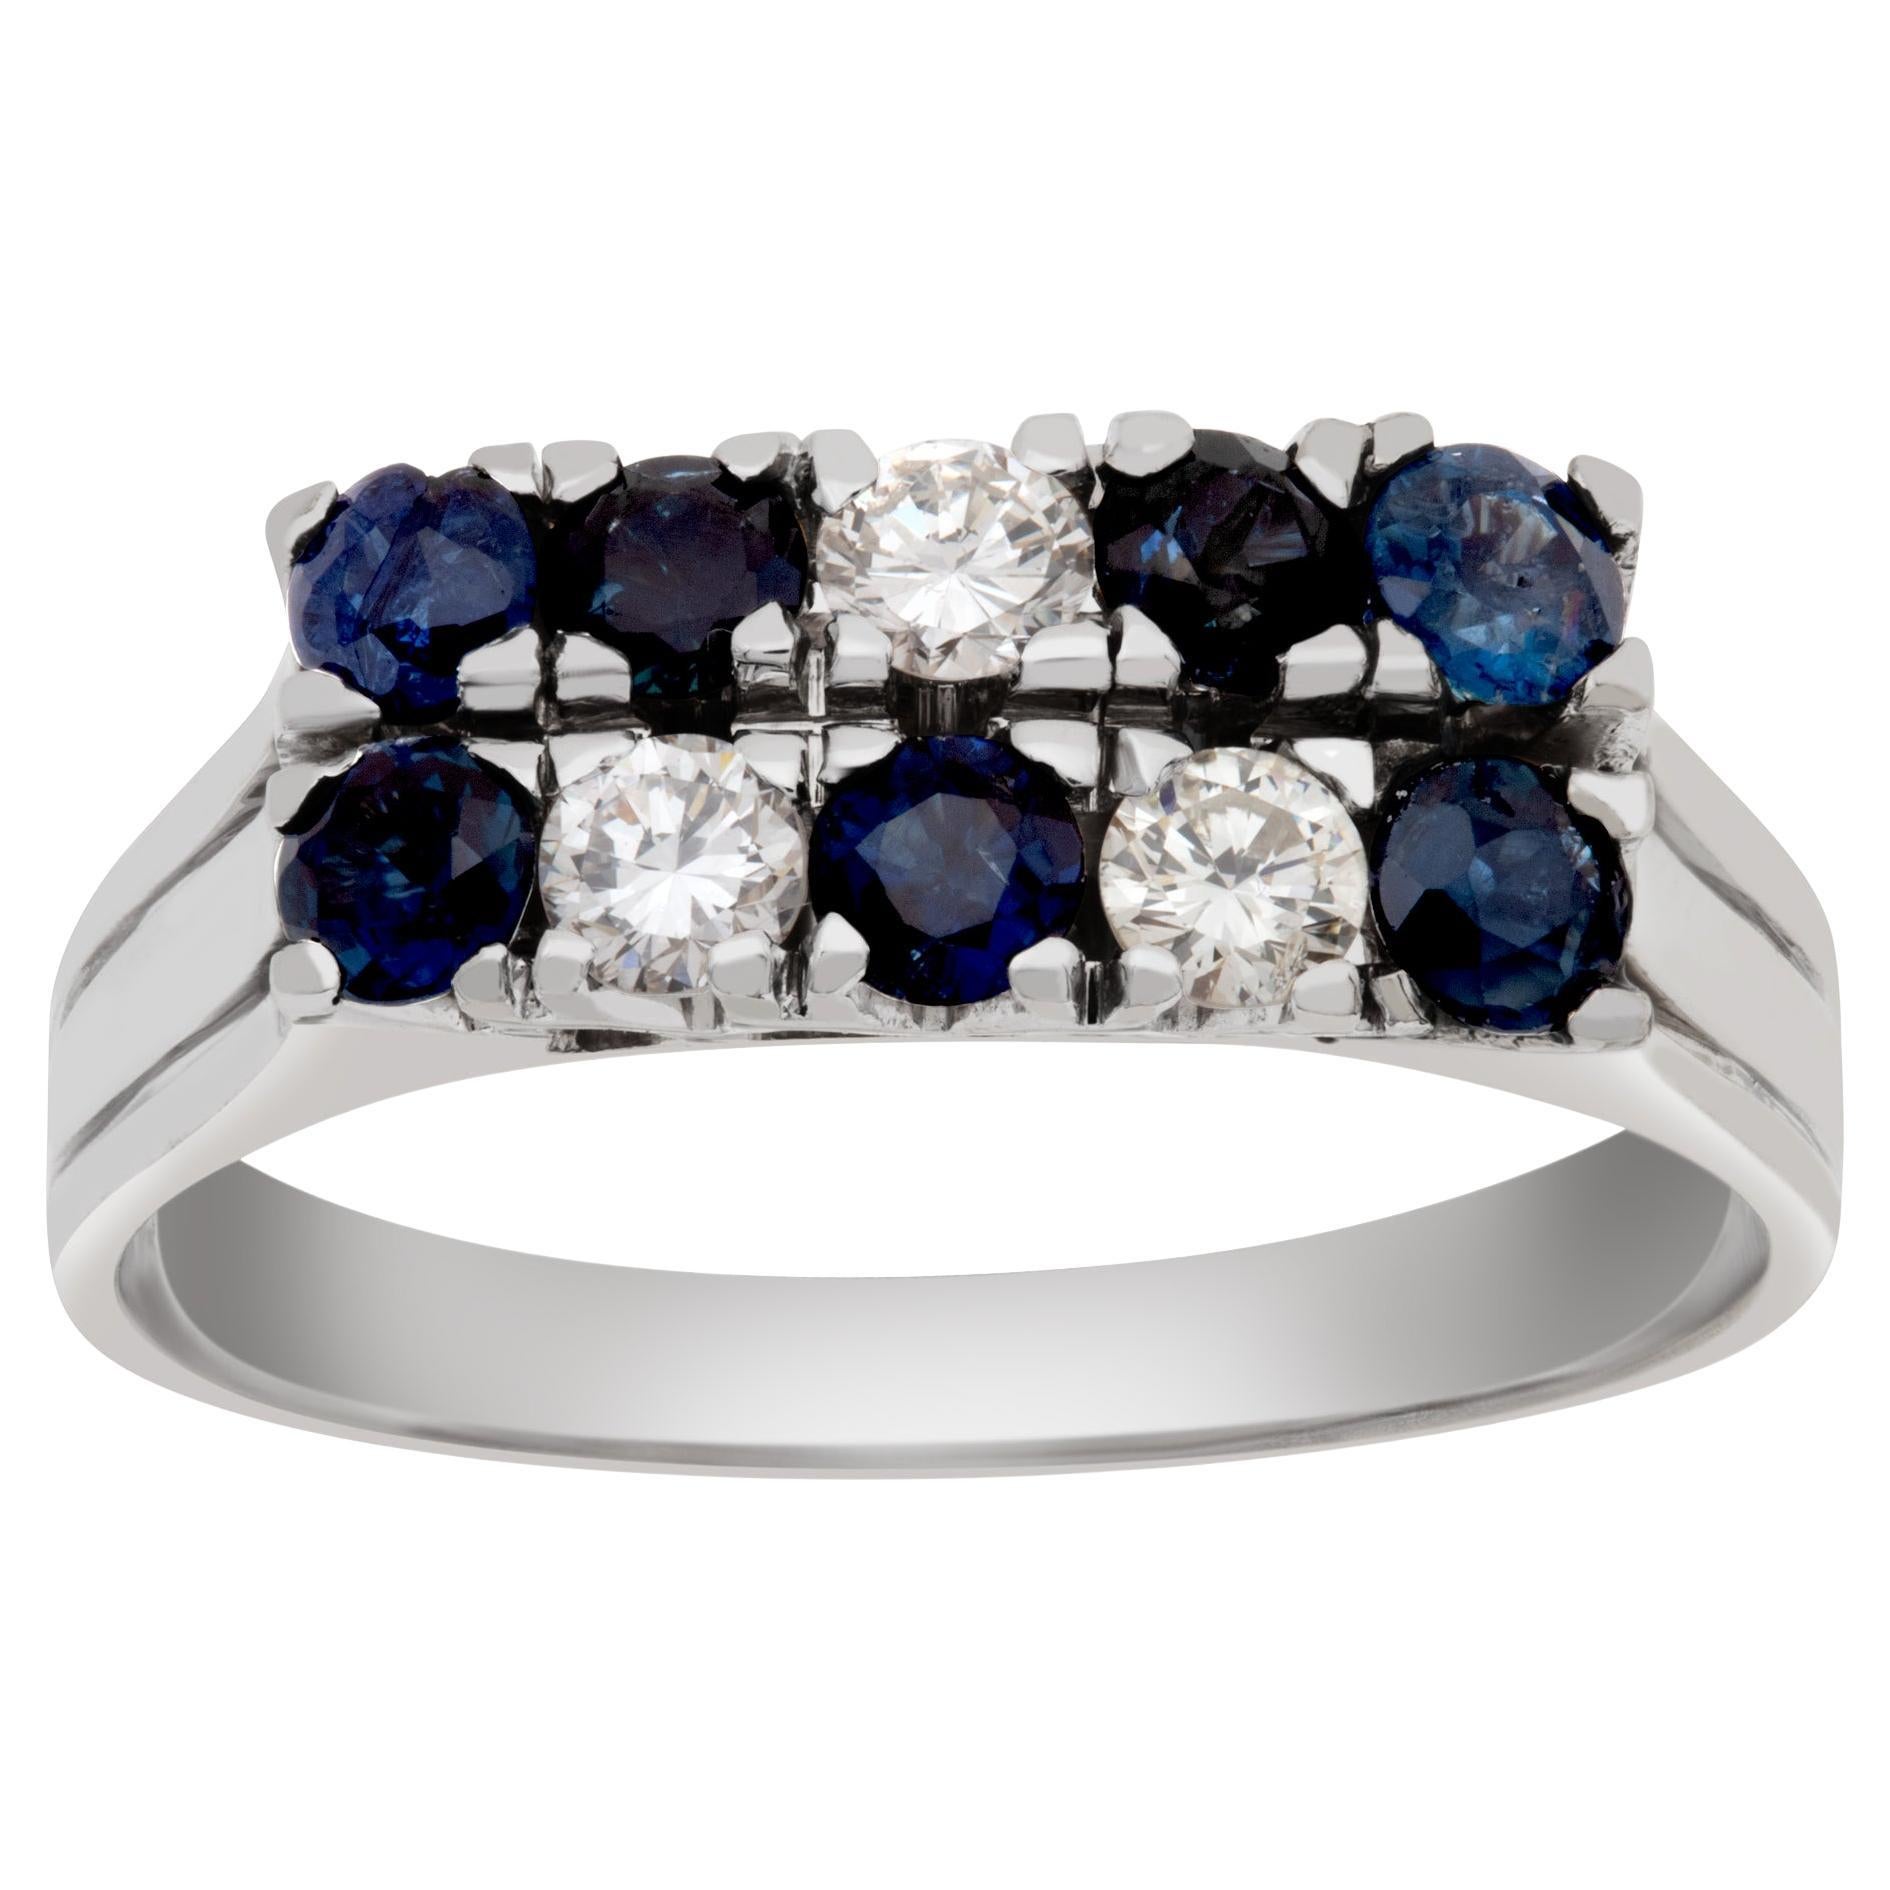 Sapphire and diamond station 14k white gold ring